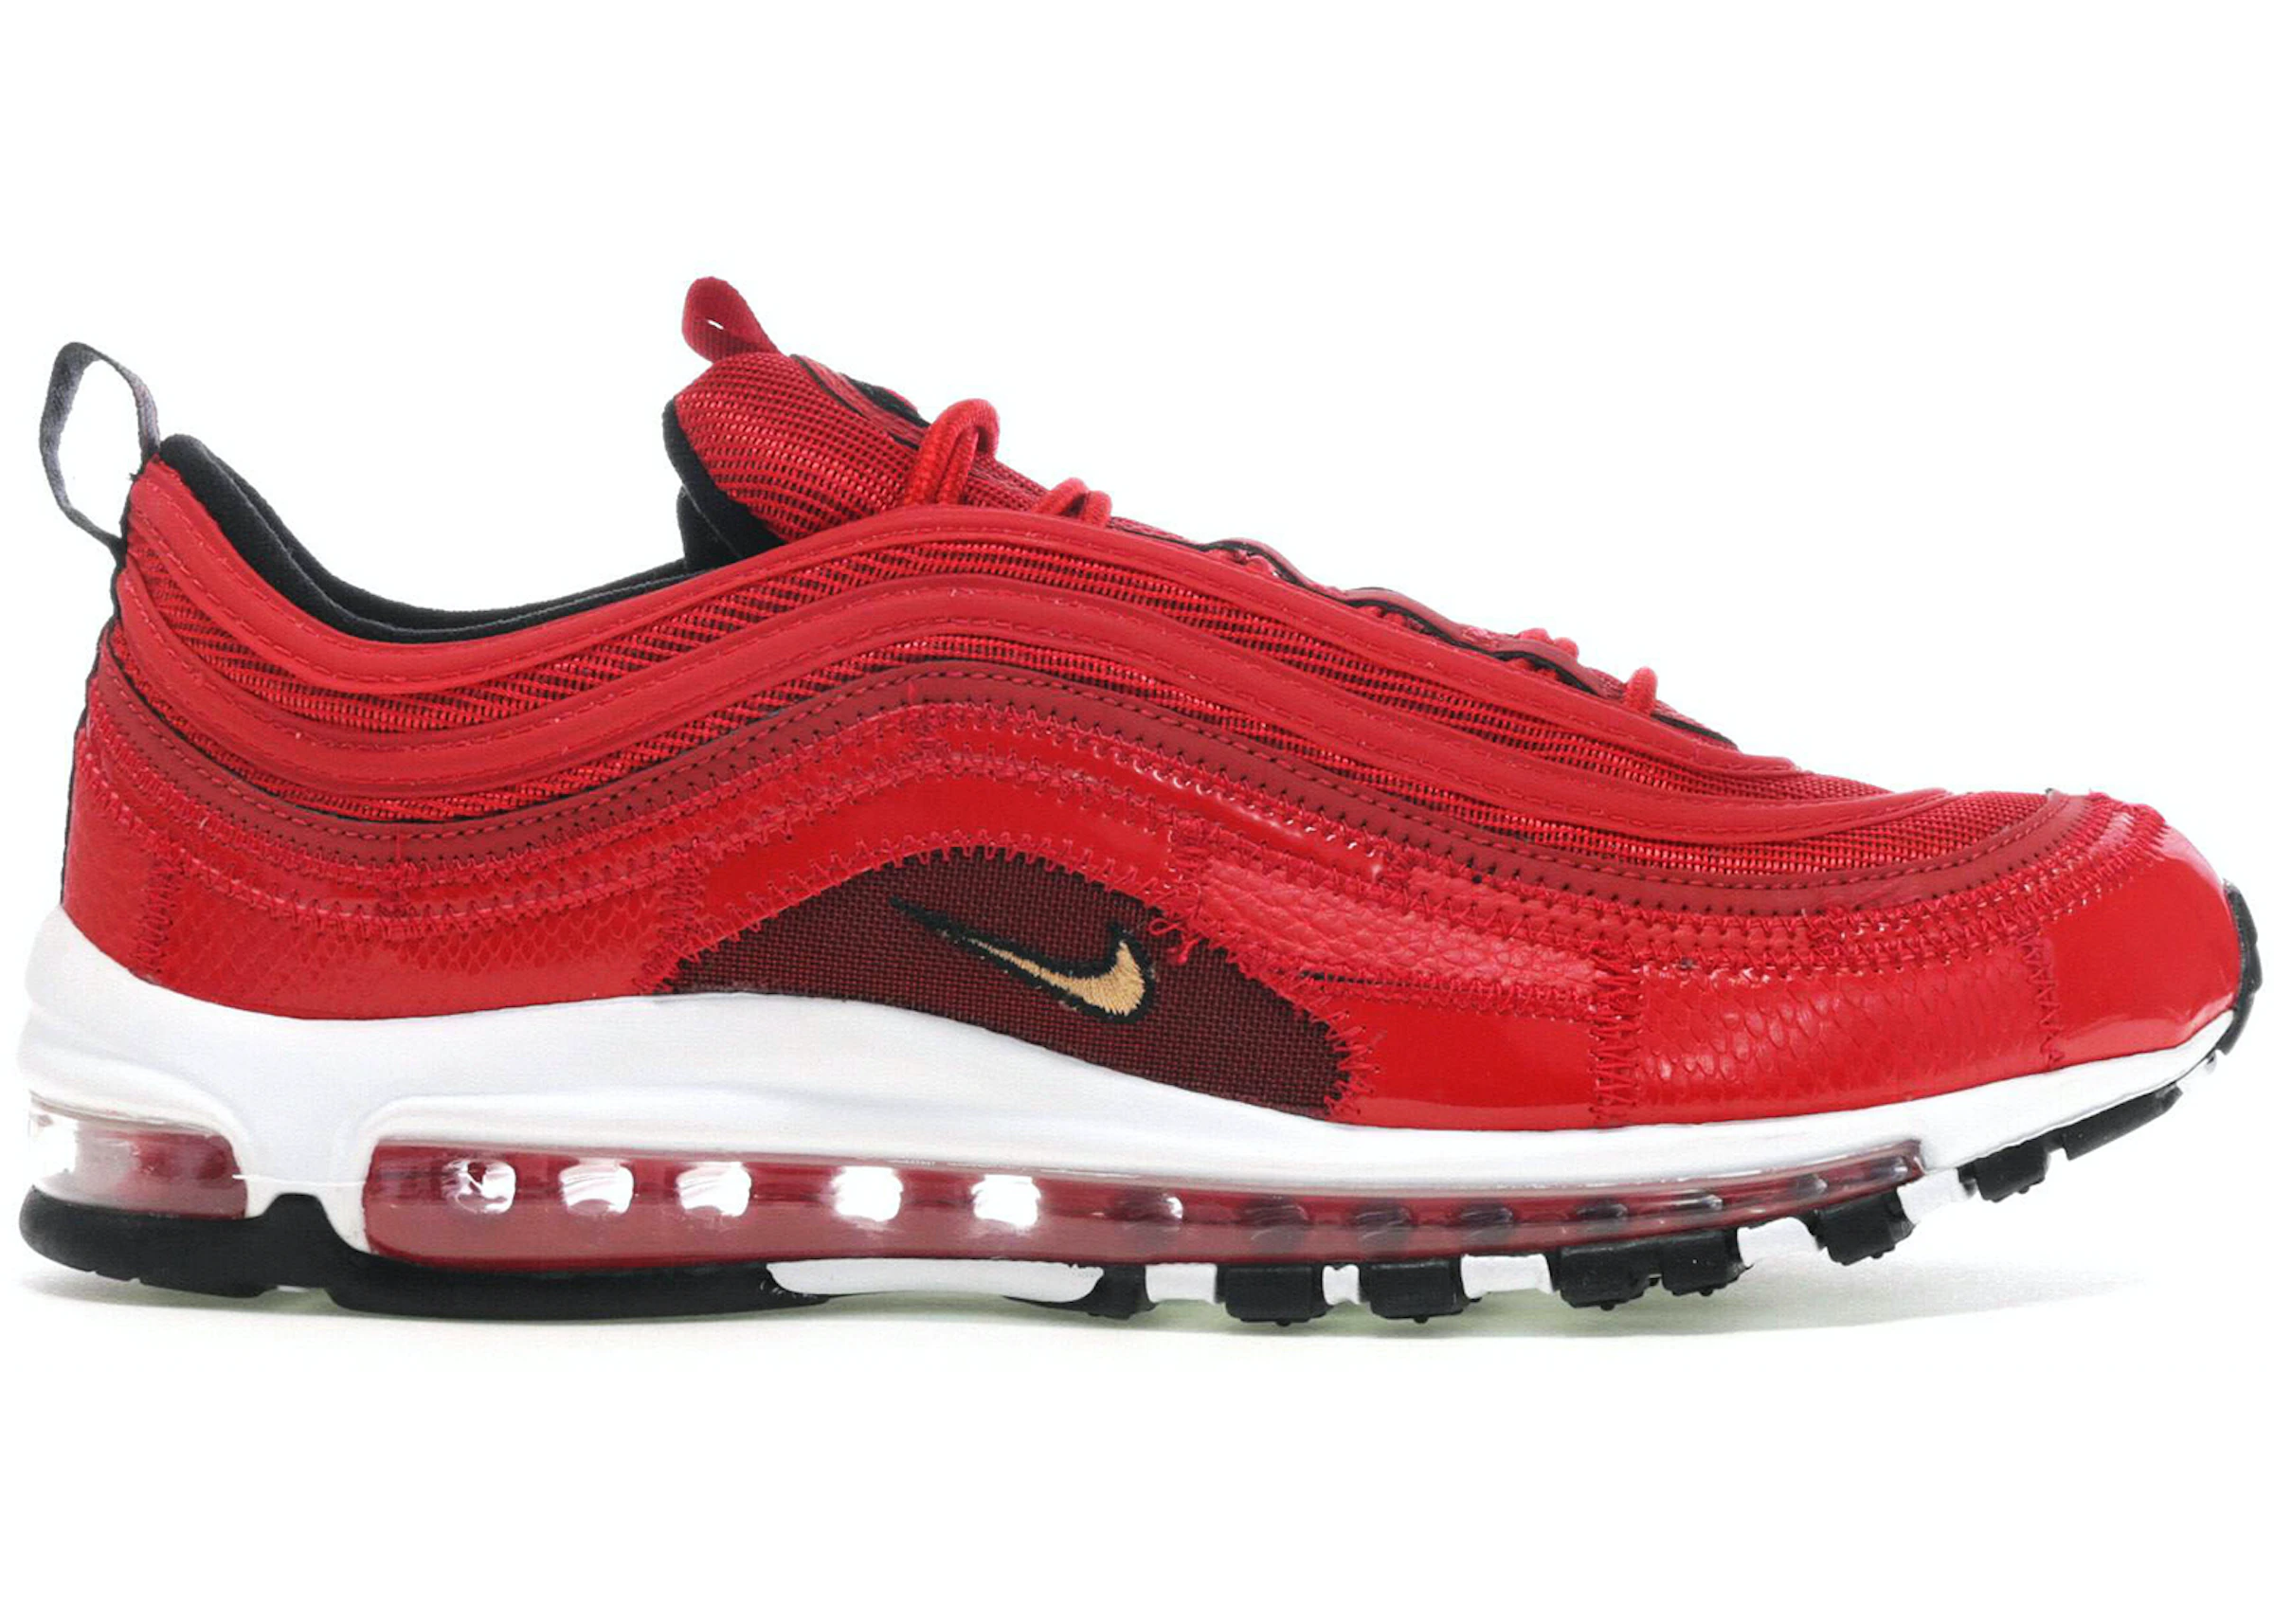 Tranquility Therapy approach Nike Air Max 97 Cristiano Ronaldo Portugal Patchwork - AQ0655-600 - US